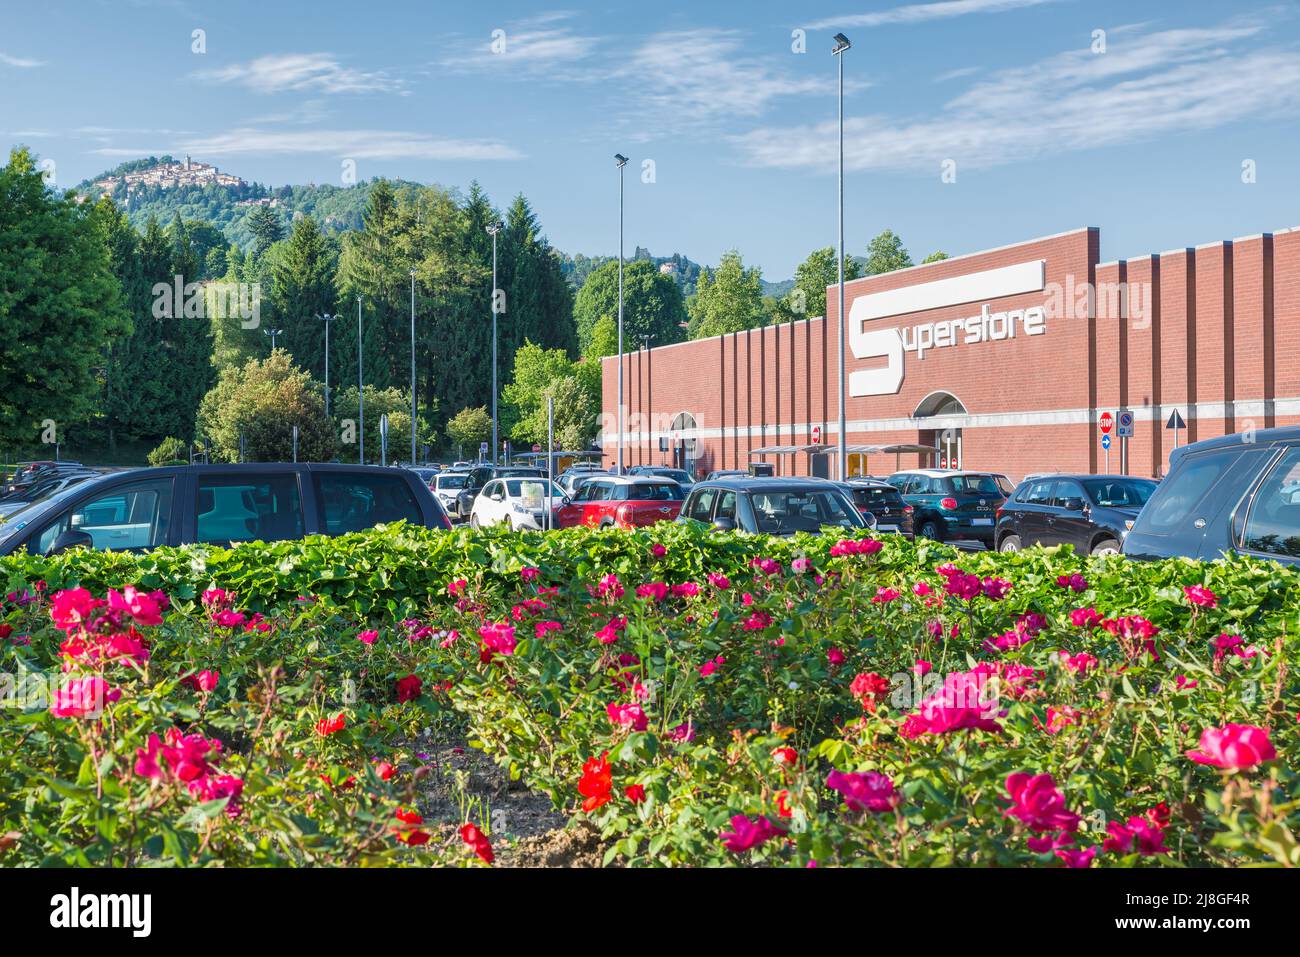 Typical Italian superstore, Esselunga, very famous supermarket chain Stock Photo